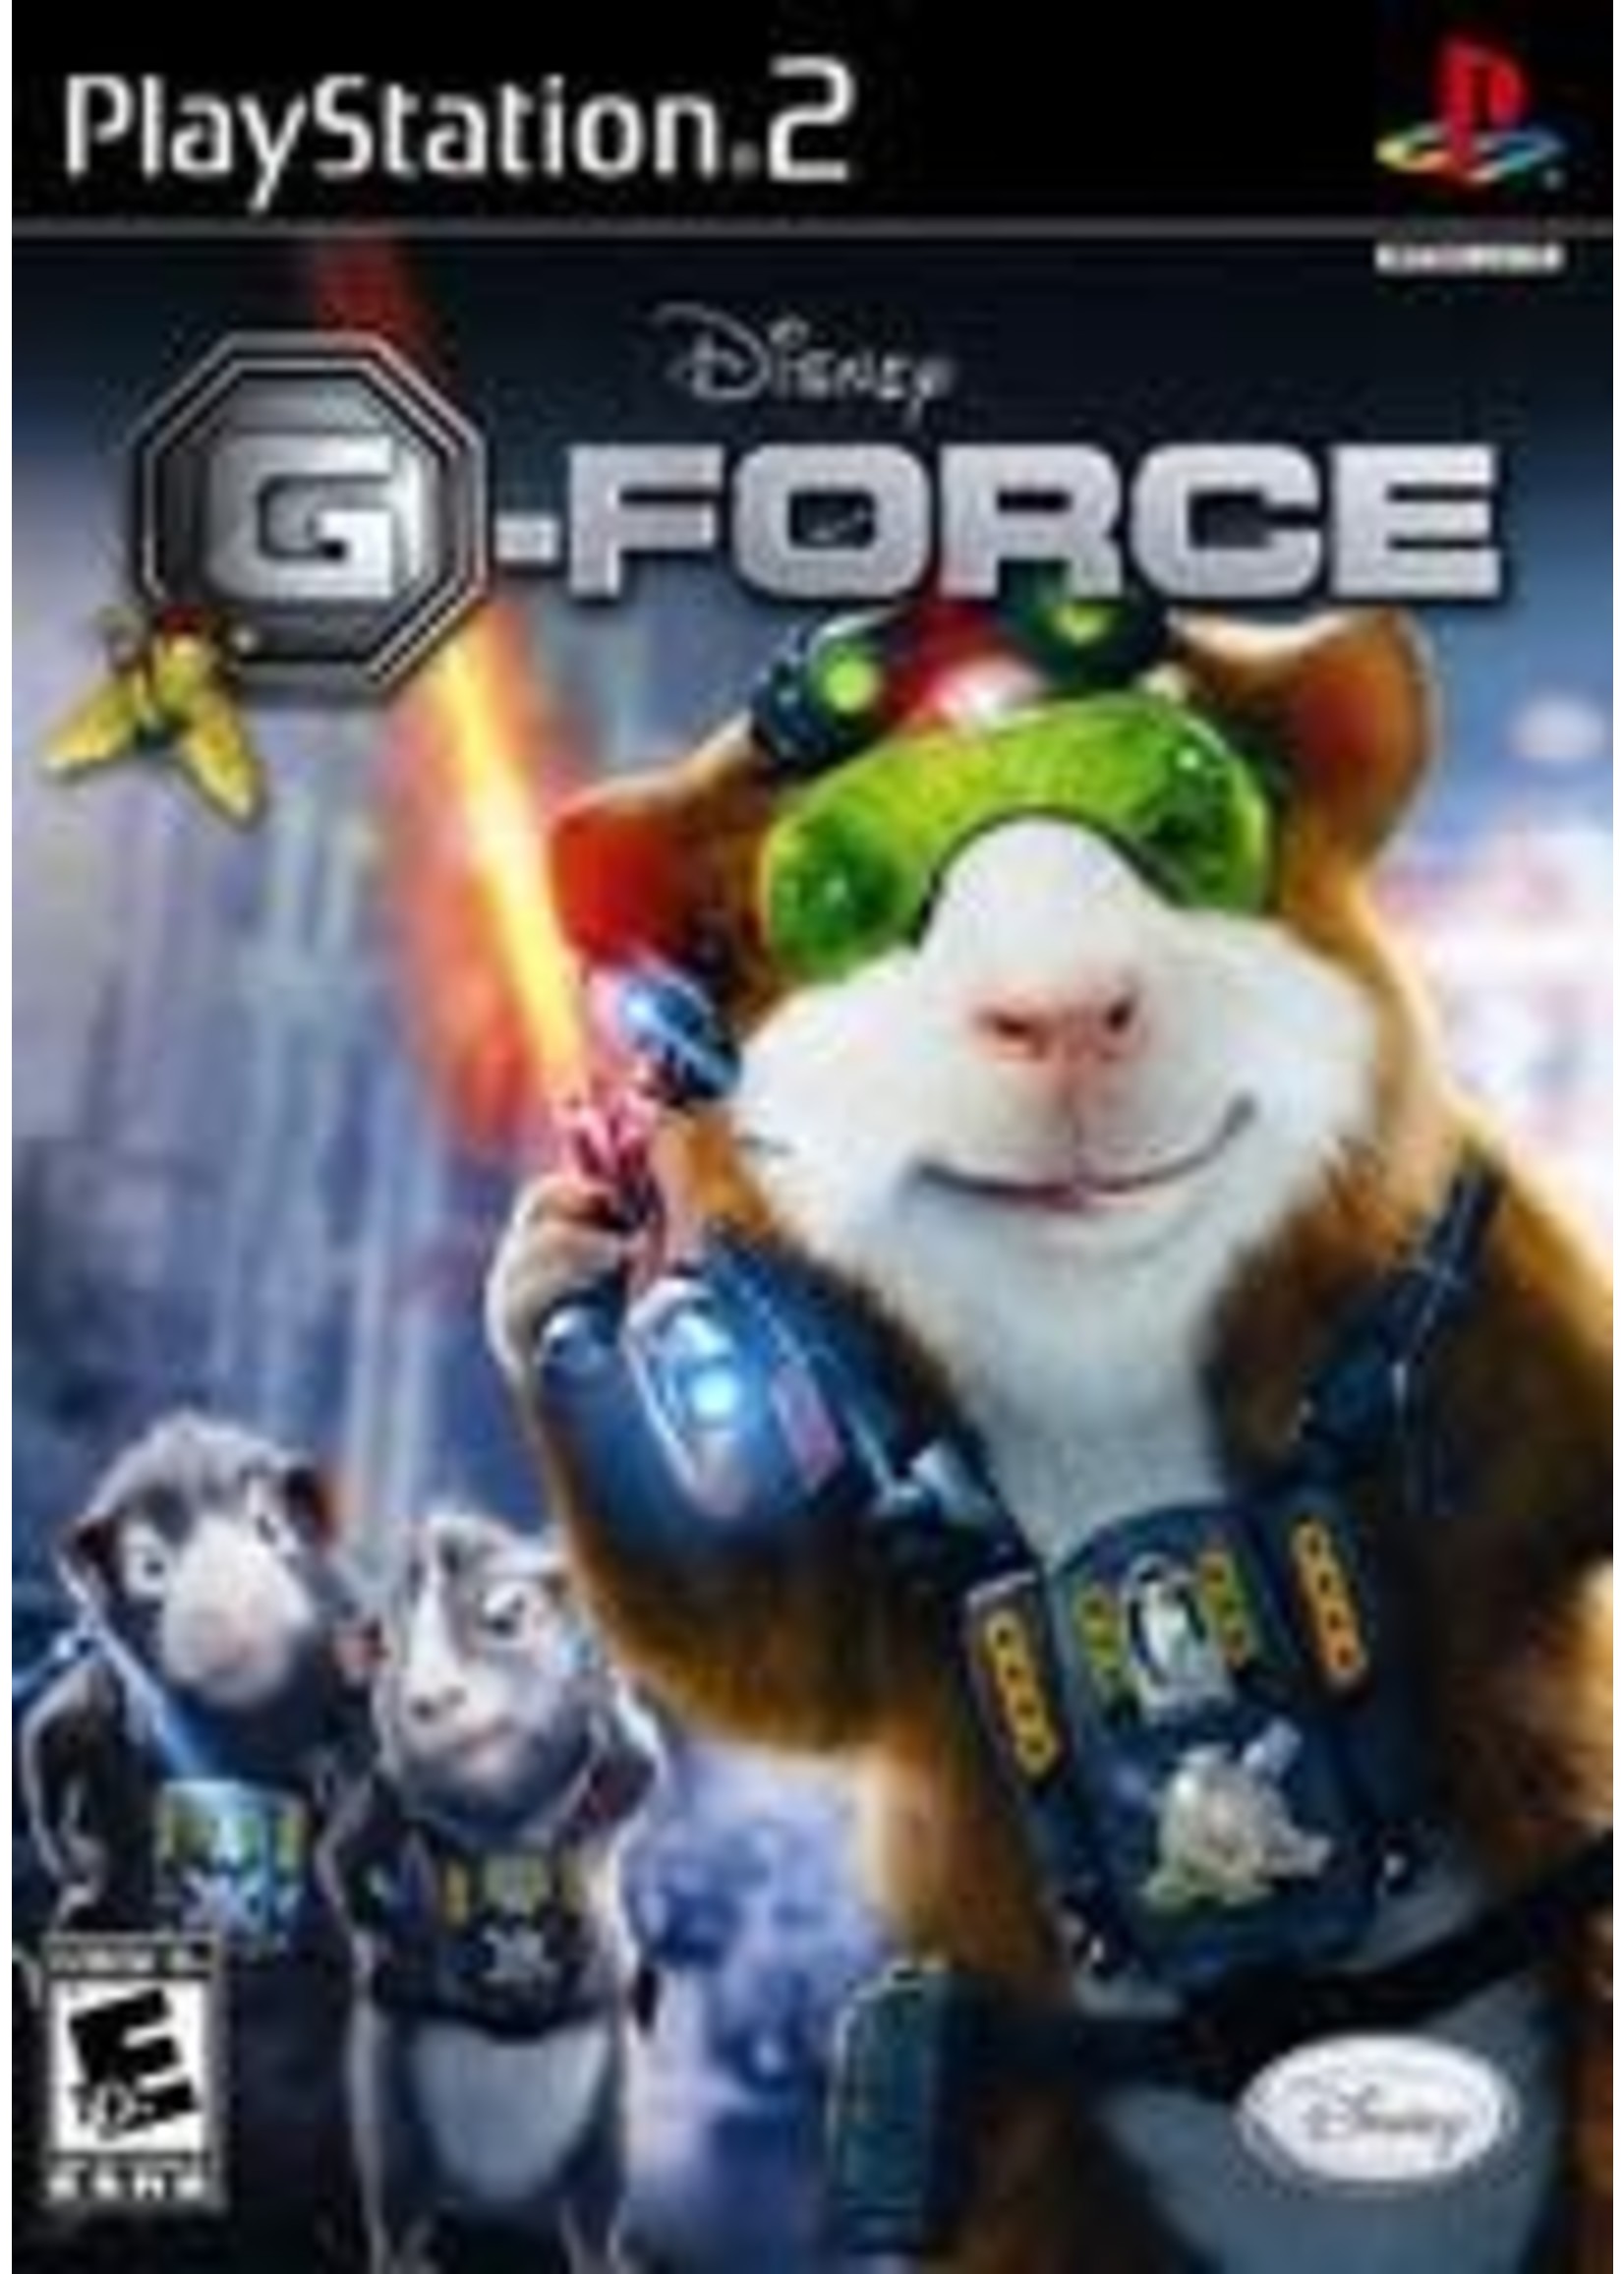 G-force - Playstation 2